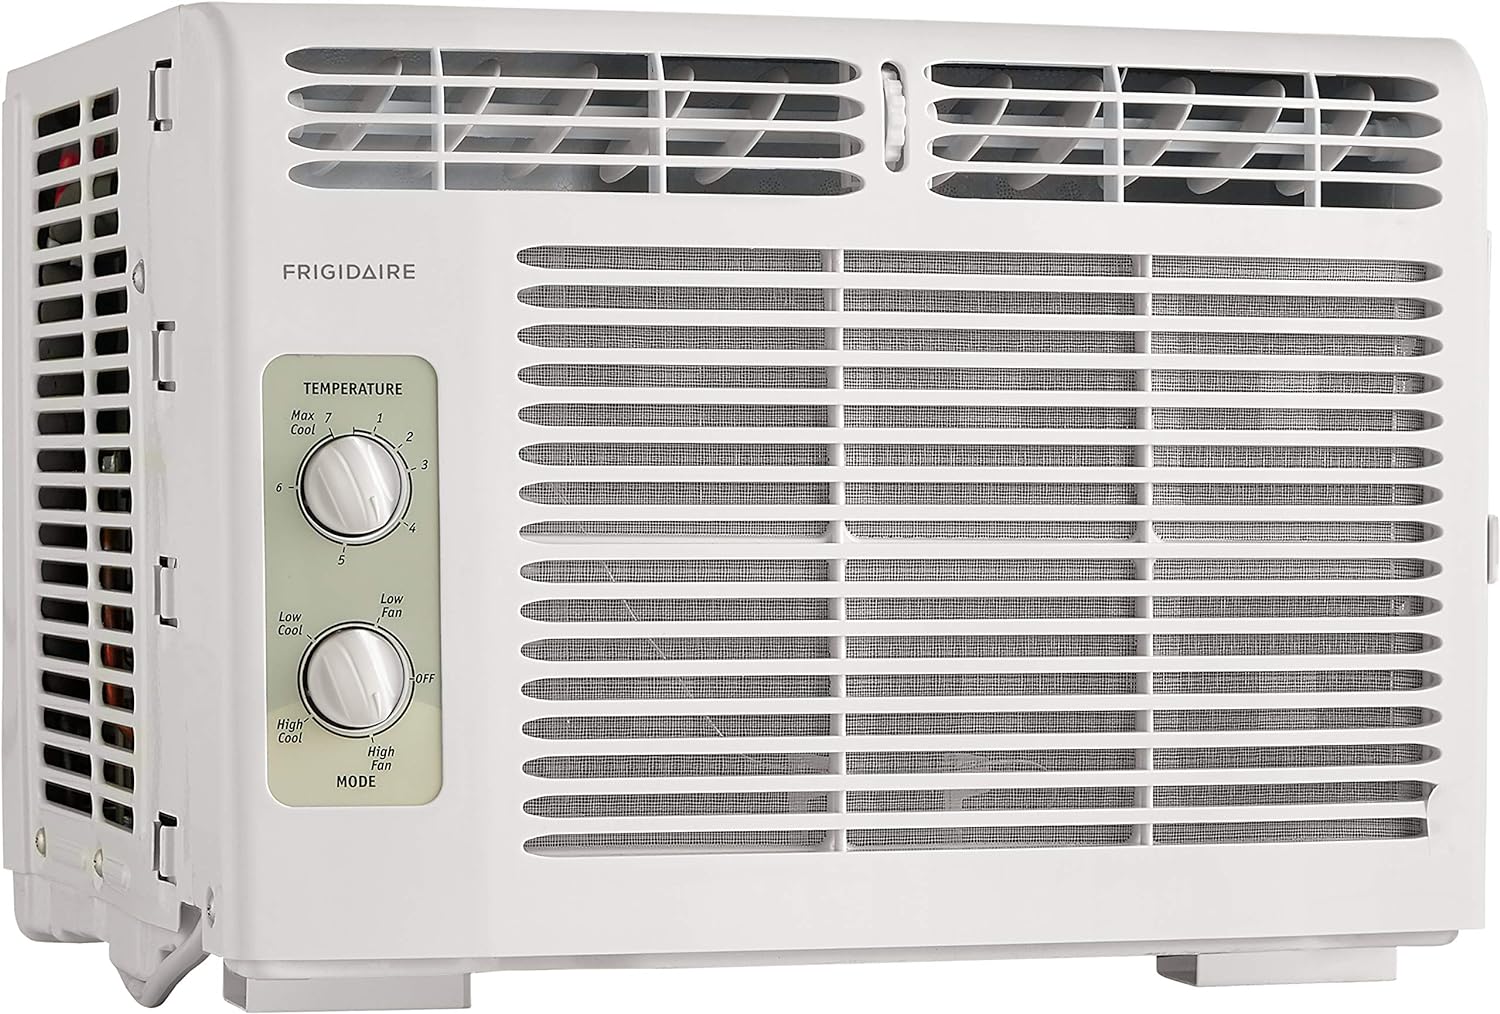 Frigidaire 5,000 BTU 115V Window-Mounted Mini-Compact Air Conditioner with Mechanical Controls, White